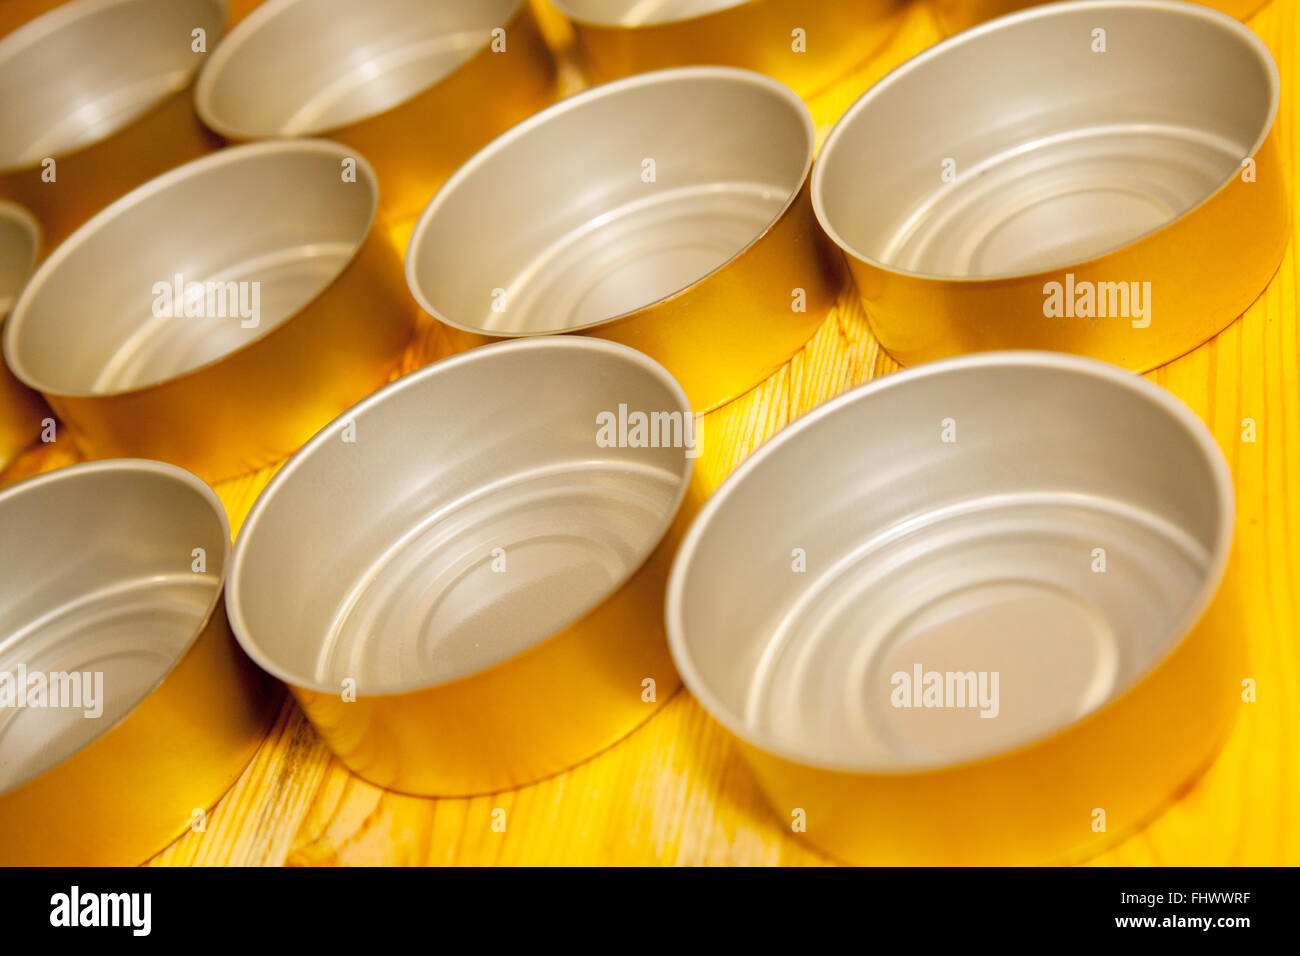 empty food tins prepared for filling Stock Photo